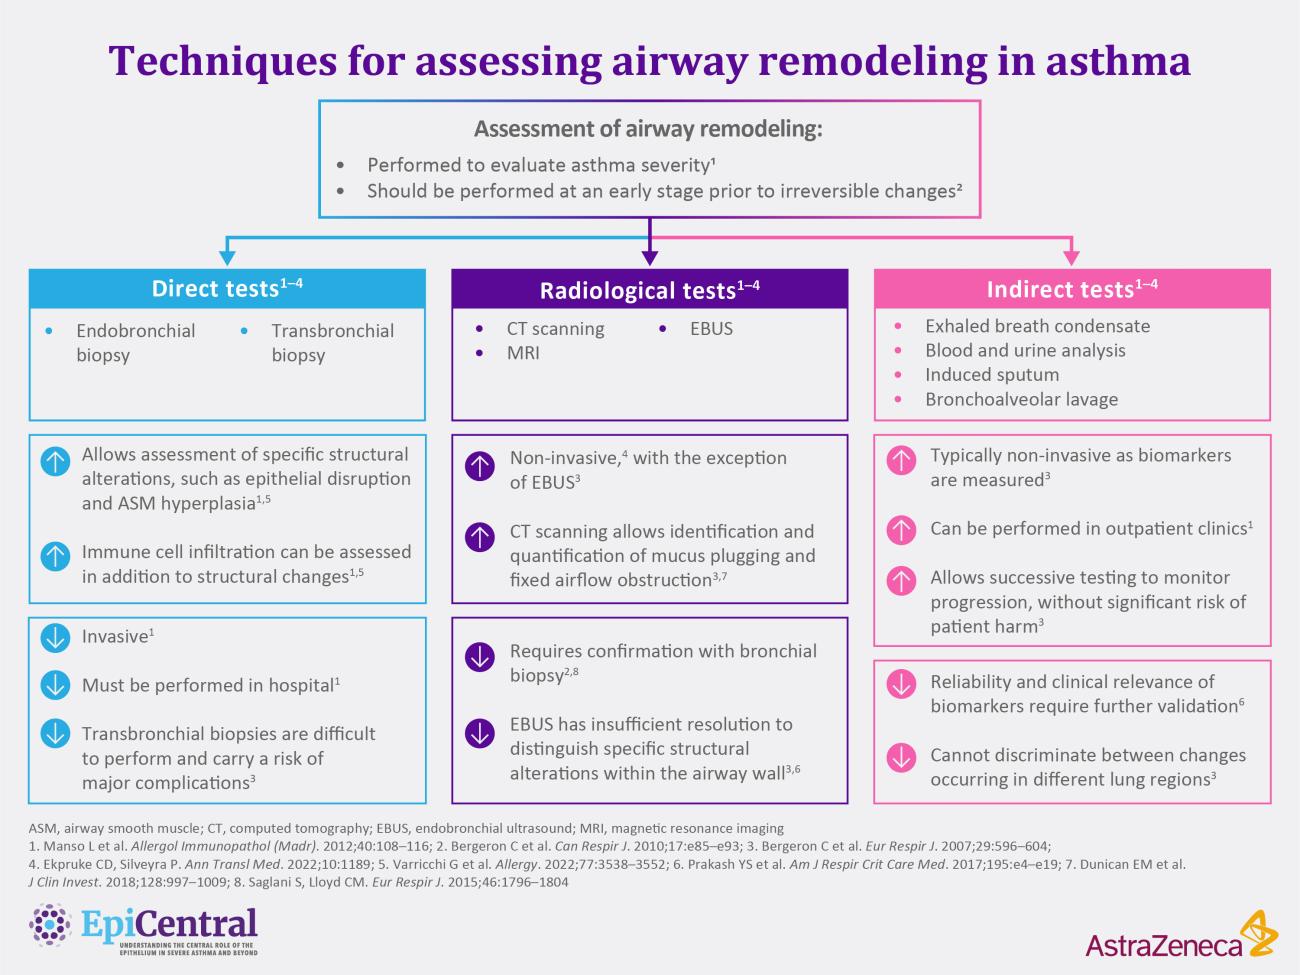 Techniques for assessing airway remodelling in asthma